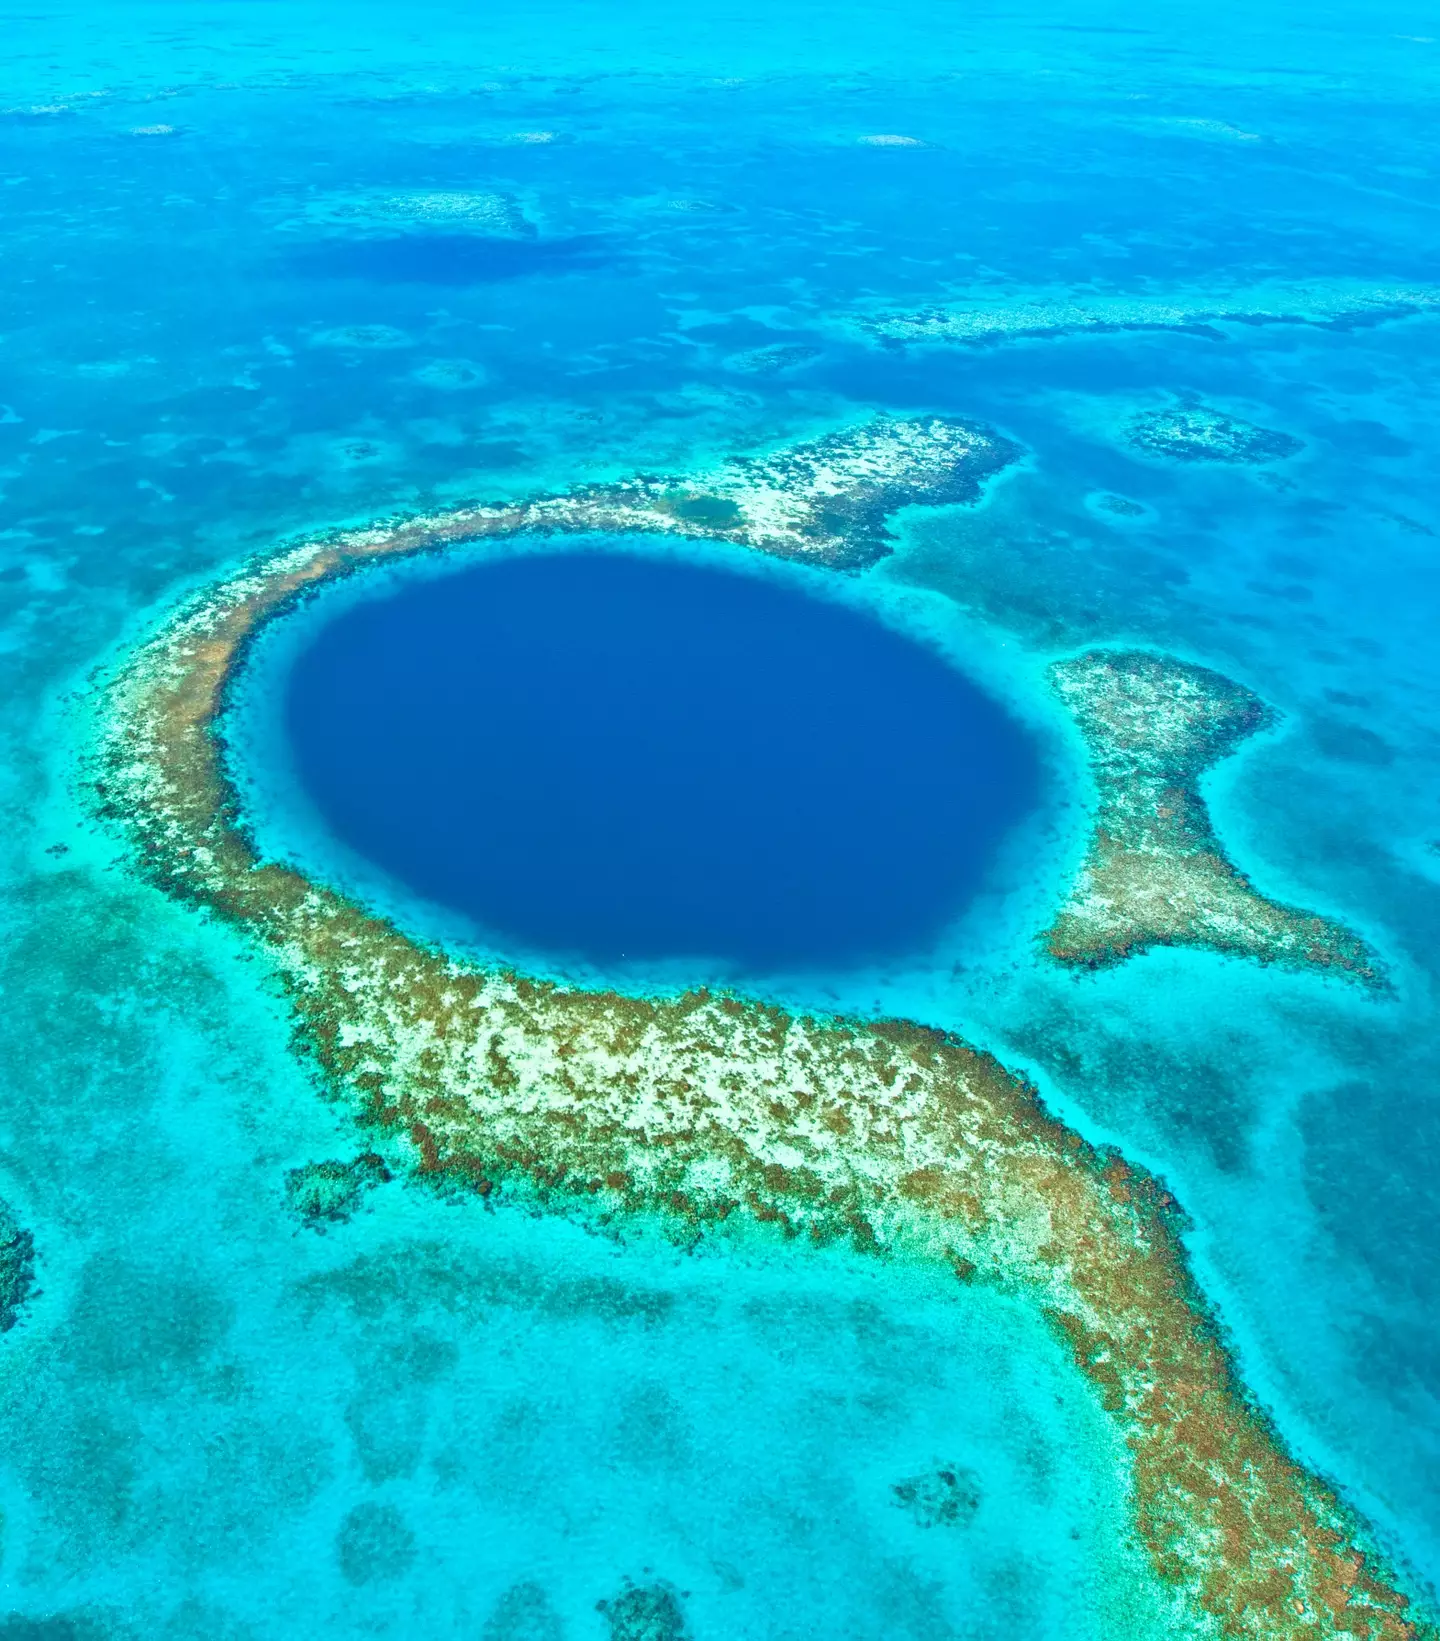 The unique properties of the blue hole could support lifeforms we haven't seen before.